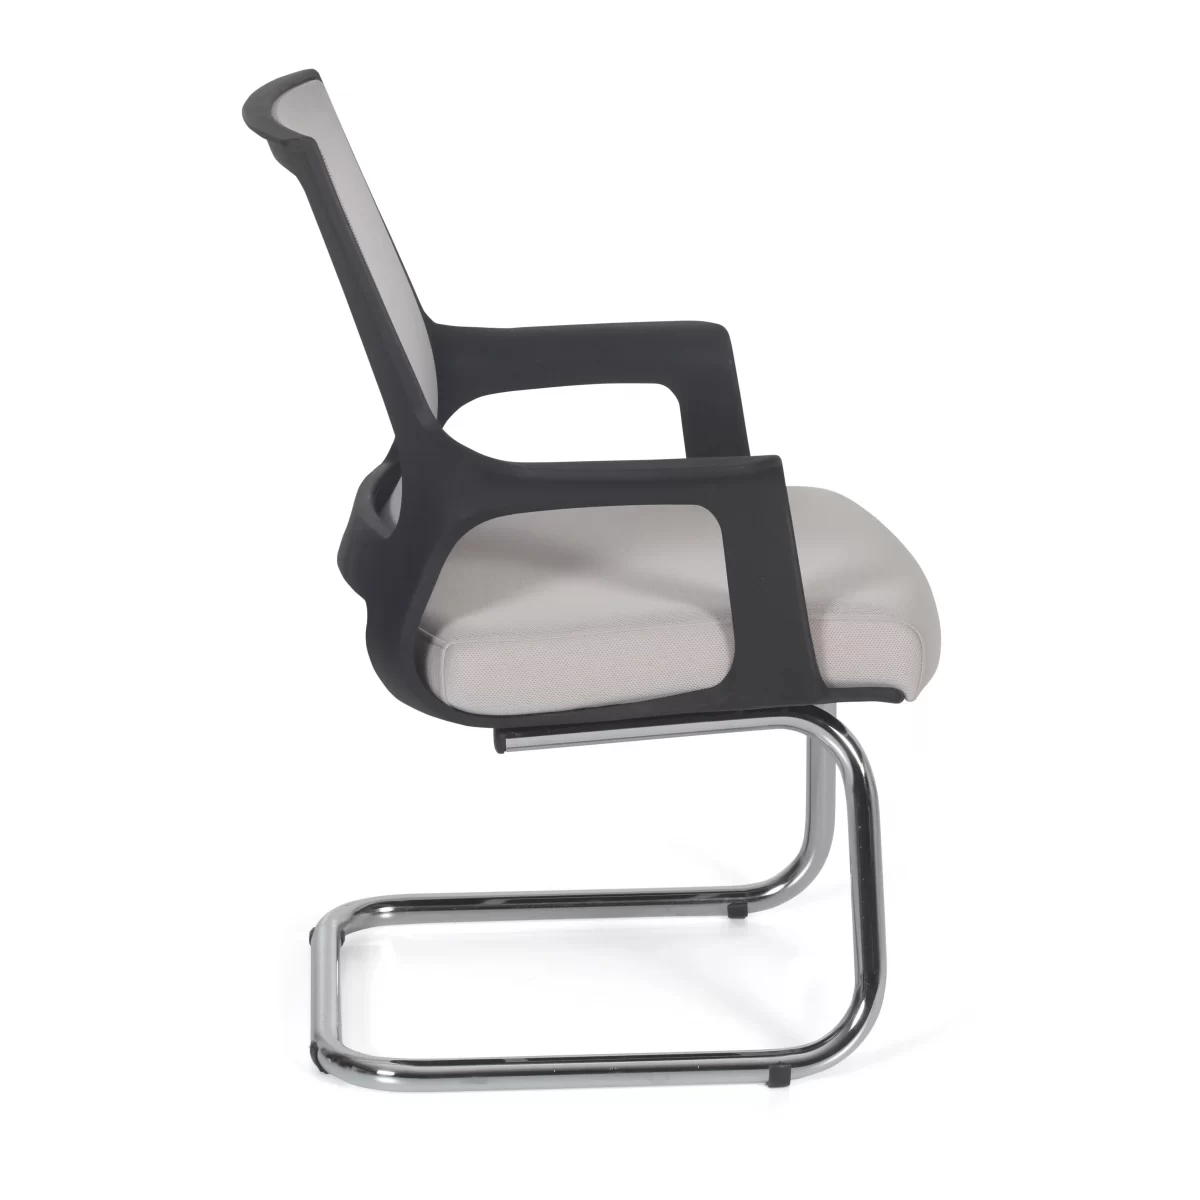 Mica Ch Office Waiting Chair Chromage Legs scaled